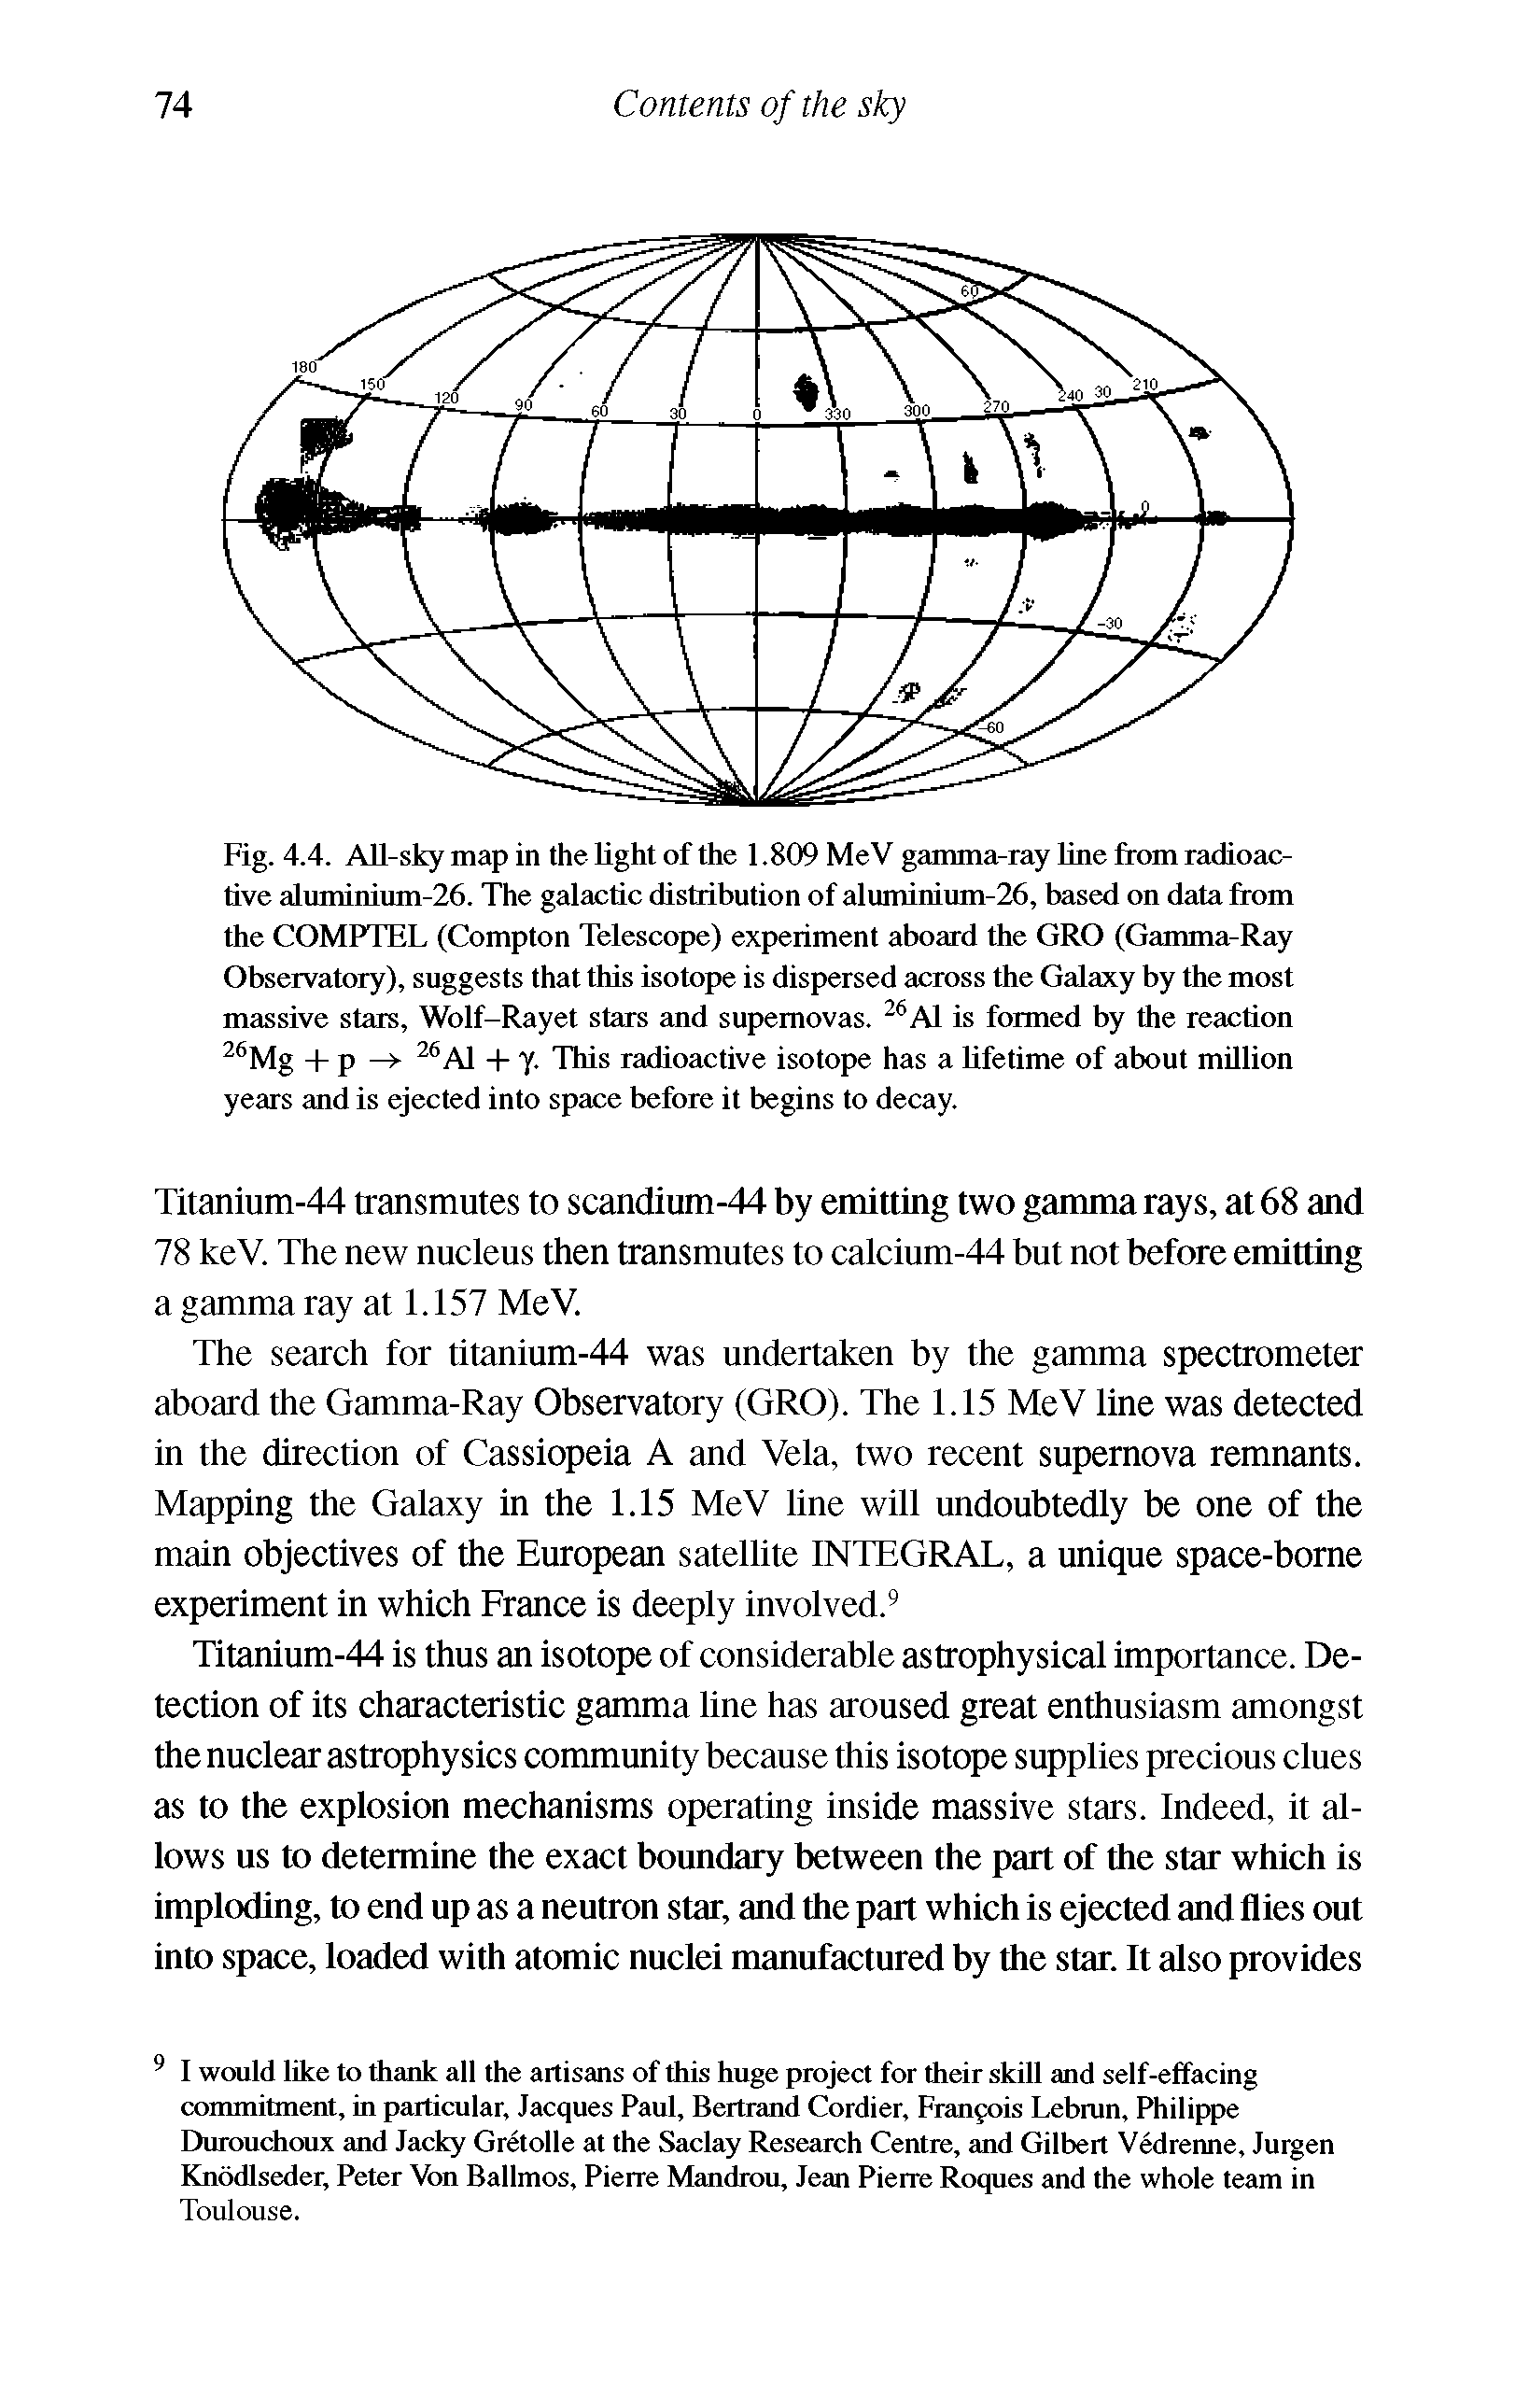 Fig. 4.4. All-sky map in the light of the 1.809 MeV gamma-ray hne from radioactive aluminium-26. The galactic distribution of aluminium-26, based on data from the COMPTEL (Compton Telescope) experiment aboard the GRO (Gamma-Ray Observatory), suggests that this isotope is dispersed across the Galaxy by the most massive stars, Wolf-Rayet stars and supernovas. Al is formed by the reaction Mg -b p — A1 -b y. This radioactive isotope has a lifetime of about million years and is ejected into space before it begins to decay.